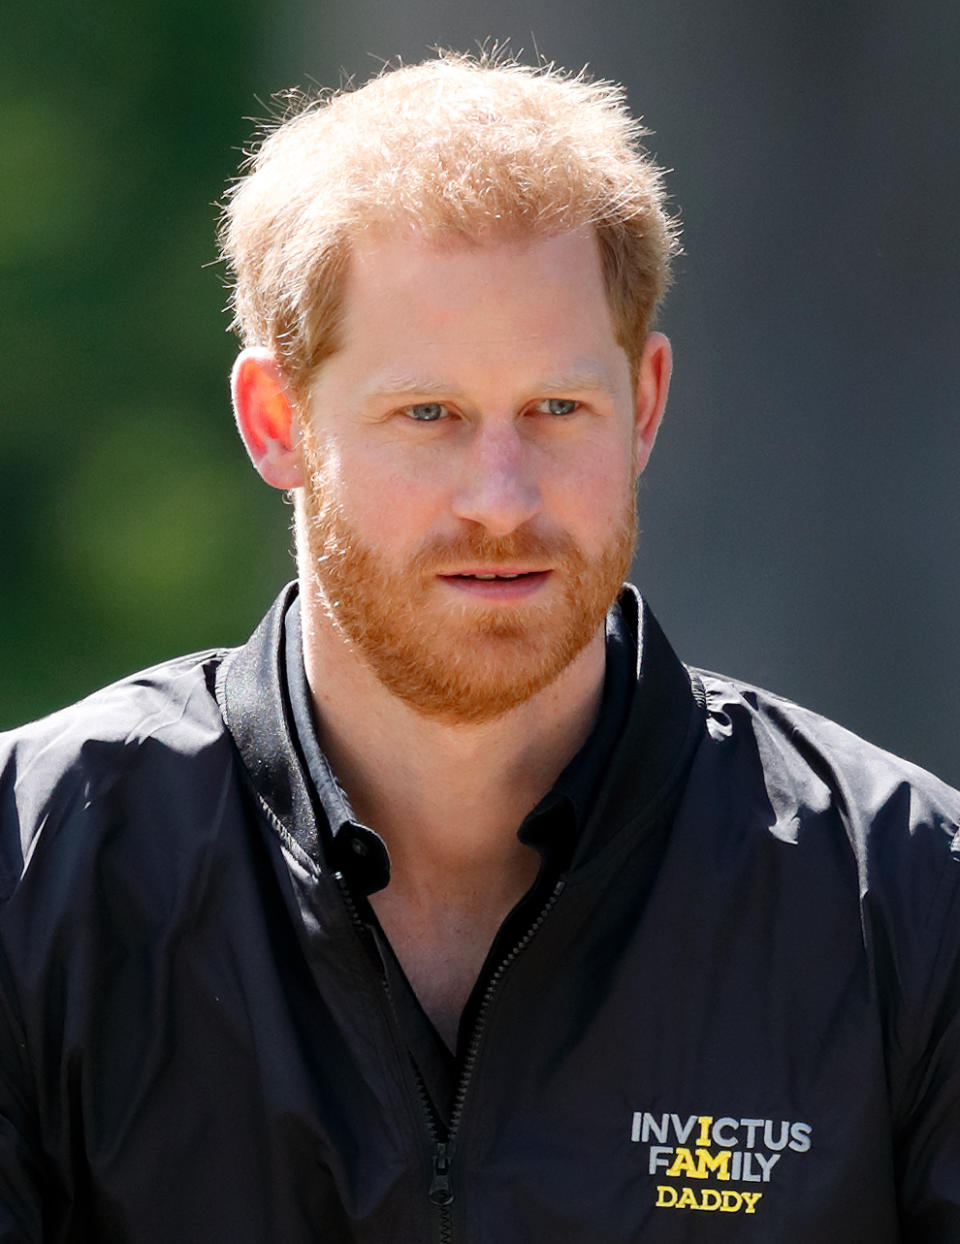 THE HAGUE, NETHERLANDS - MAY 09: (EMBARGOED FOR PUBLICATION IN UK NEWSPAPERS UNTIL 24 HOURS AFTER CREATE DATE AND TIME) Prince Harry, Duke of Sussex visits Sportcampus Zuiderpark as part of a programme of events to mark the official launch of the Invictus Games The Hague 2020 on May 9, 2019 in The Hague, Netherlands. (Photo by Max Mumby/Indigo/Getty Images)